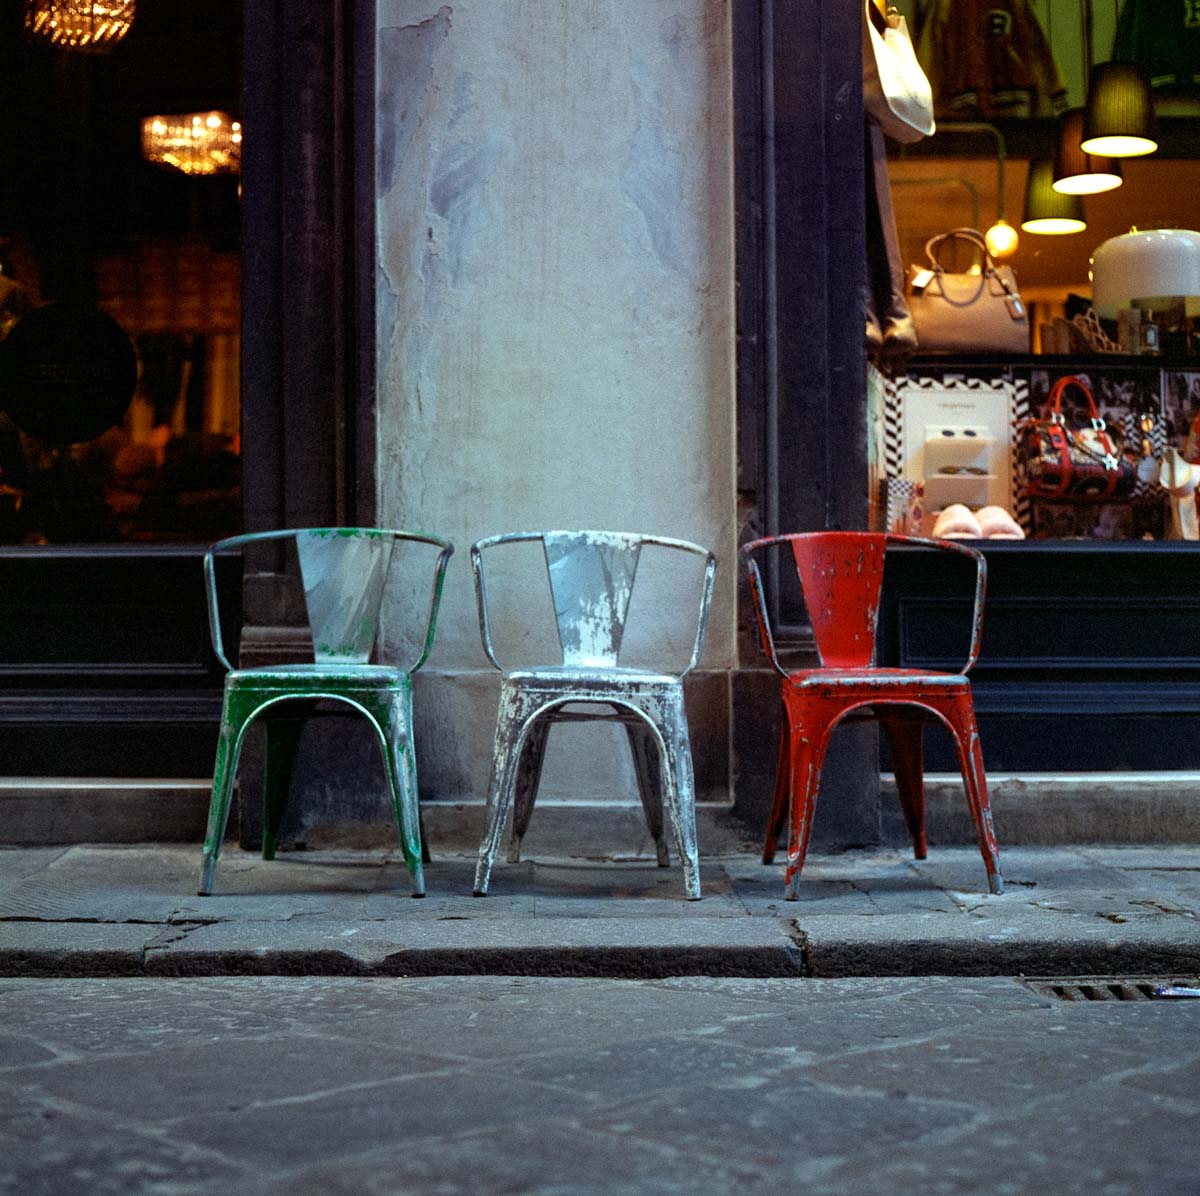 5 Frames... Mostly in Italy on Lomography F²/400 (EI 200 / 120 Format / Hasselblad 500C/M) - by Scott Micciche